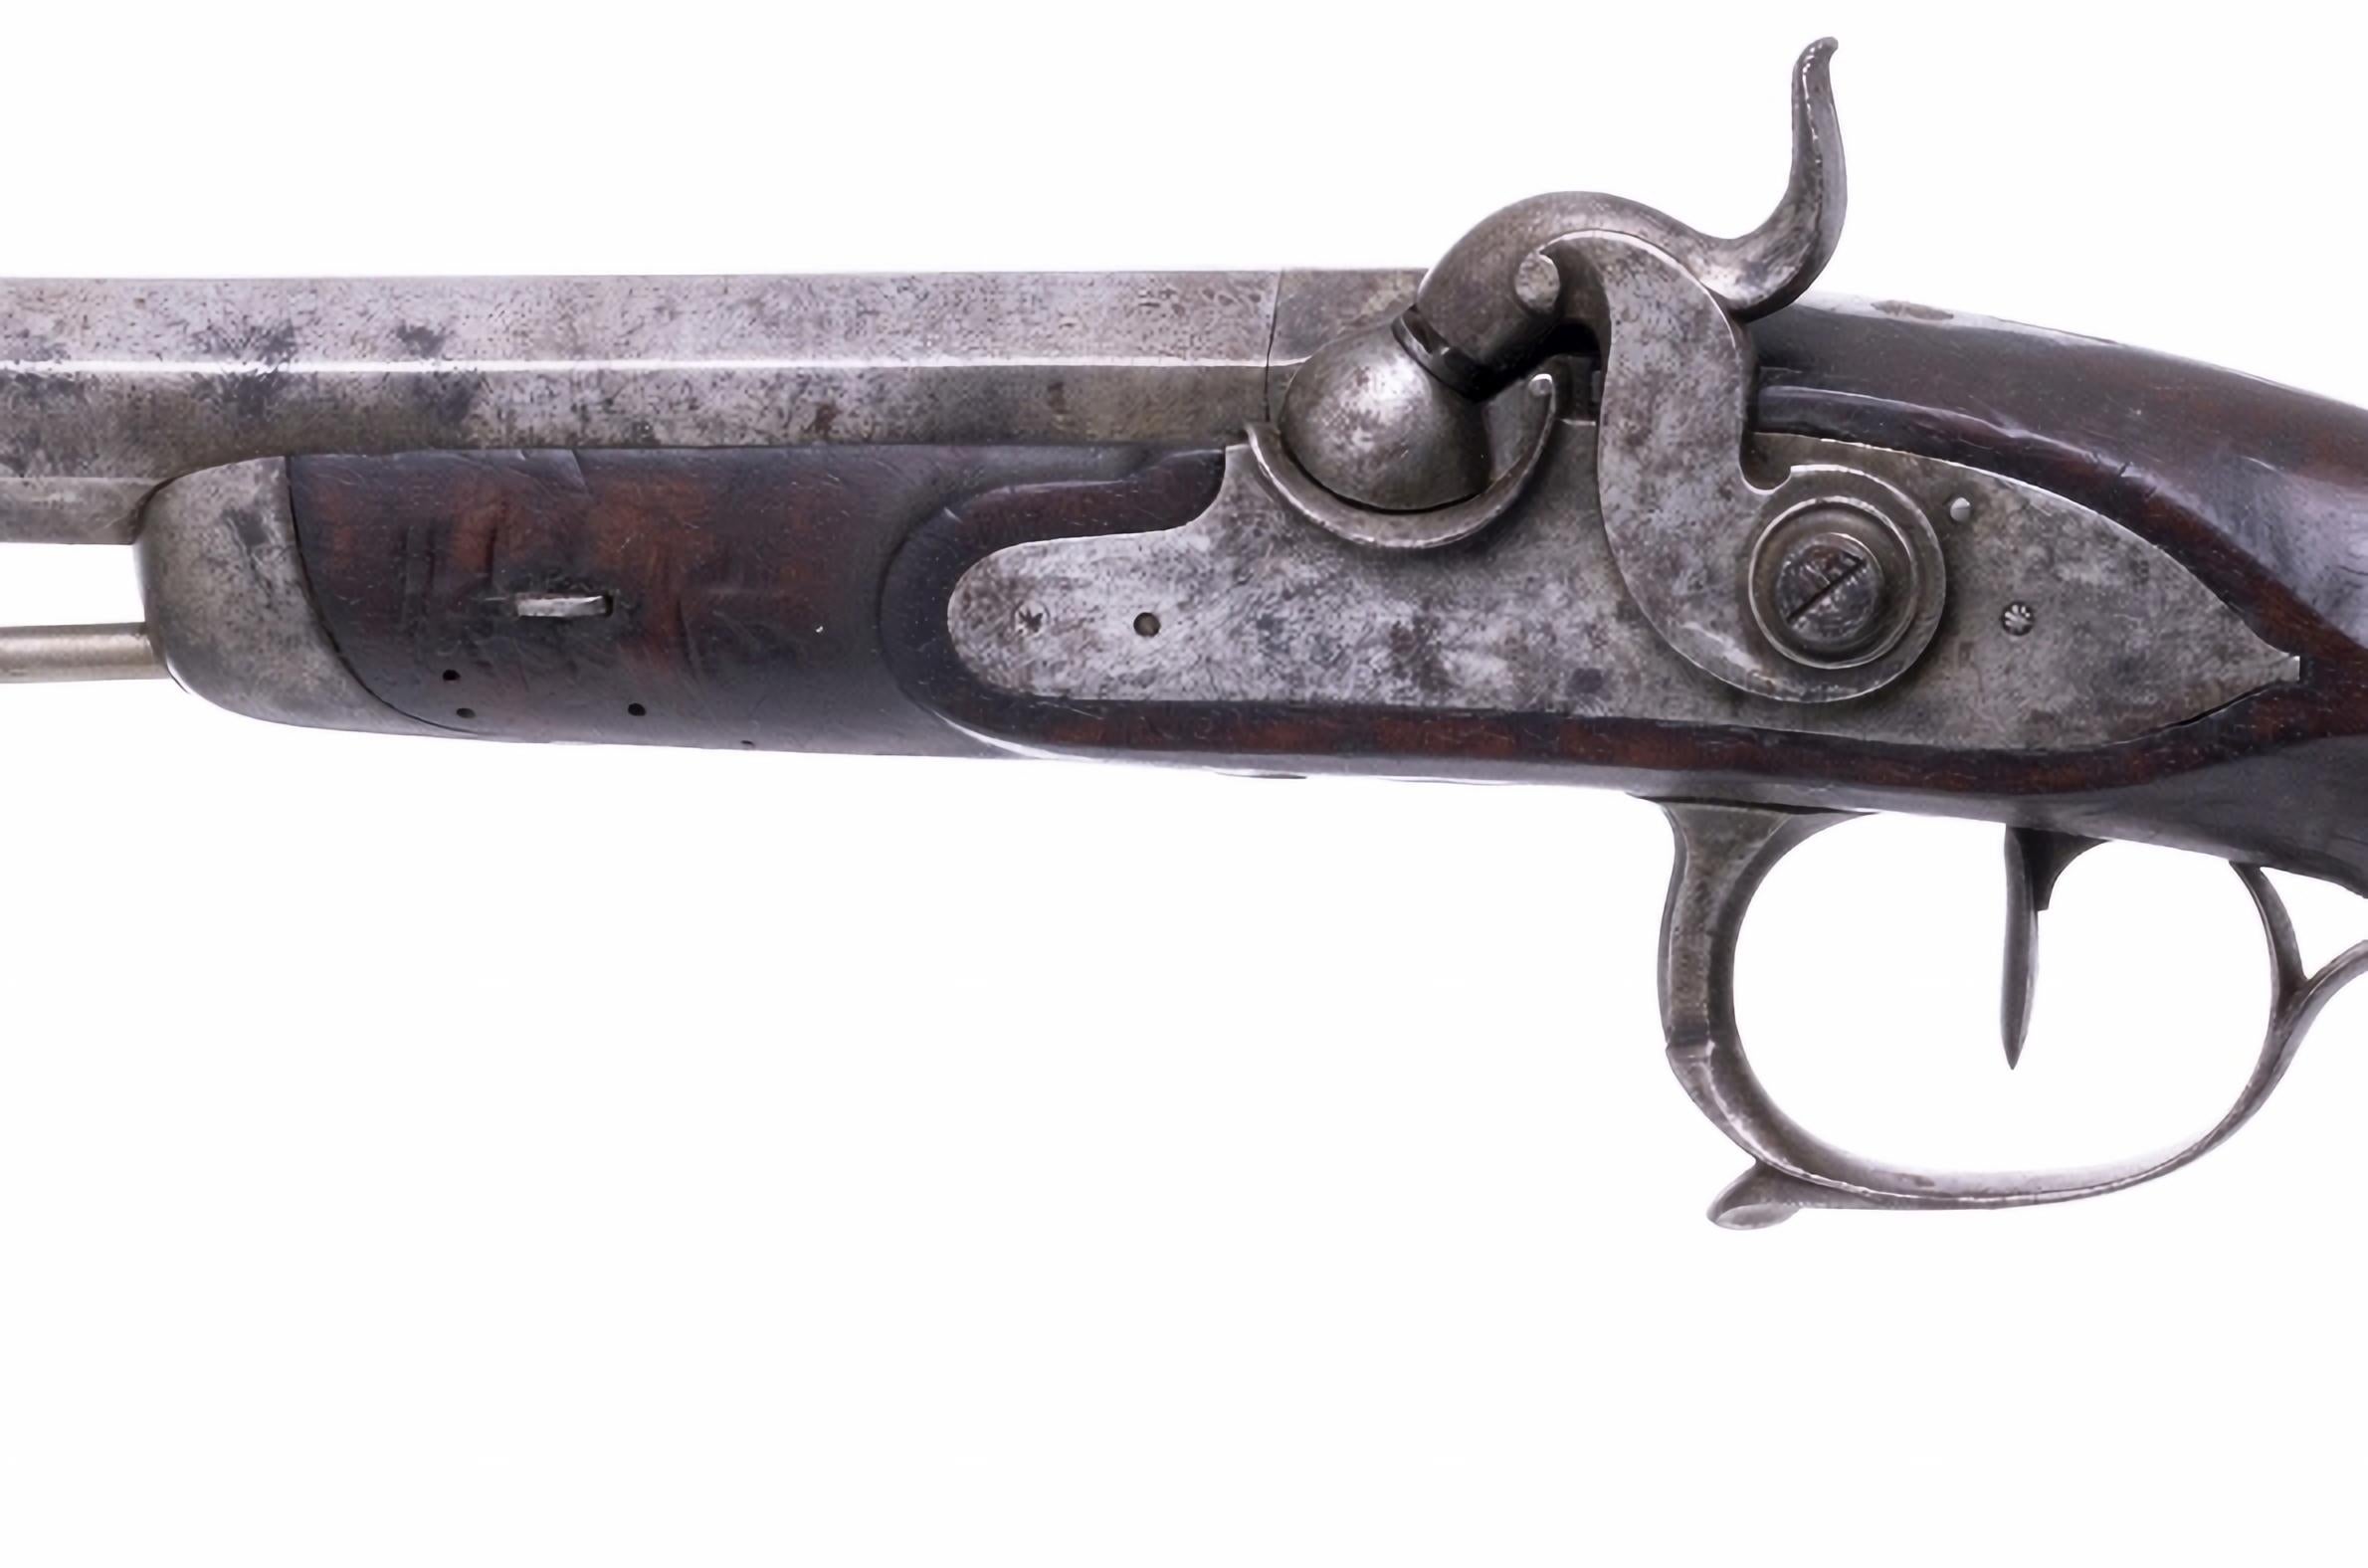 Gun
French, mid-century. 19th century, octave muzzle loading barrel and percussion side closure. Slight oxidation. obsolete. Length: (total) 33.5 cm.